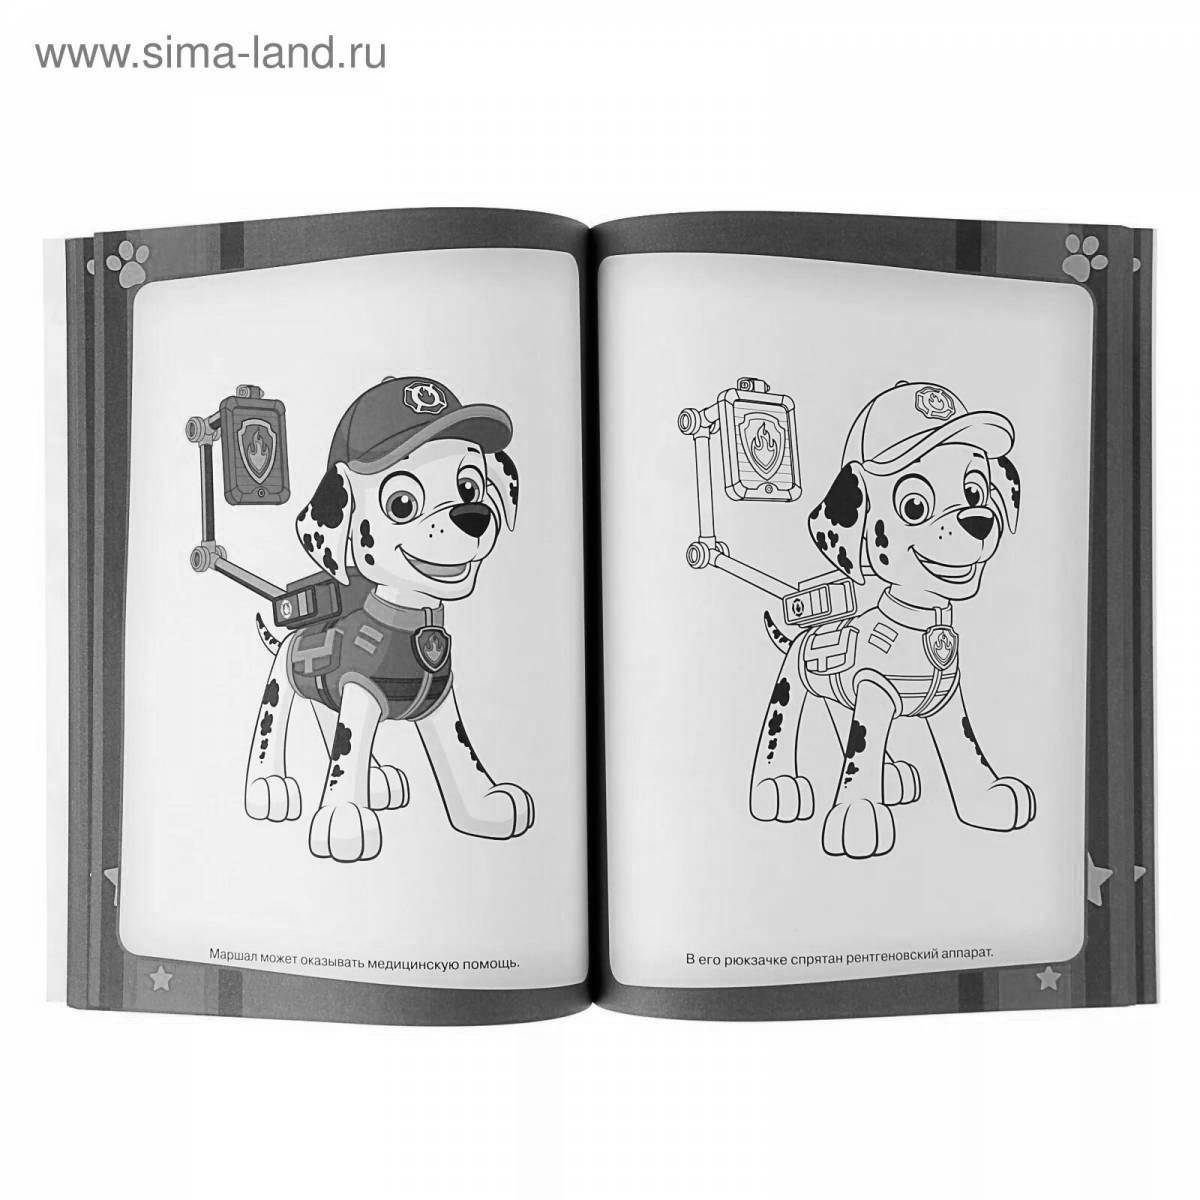 Paw Patrol bright coloring page